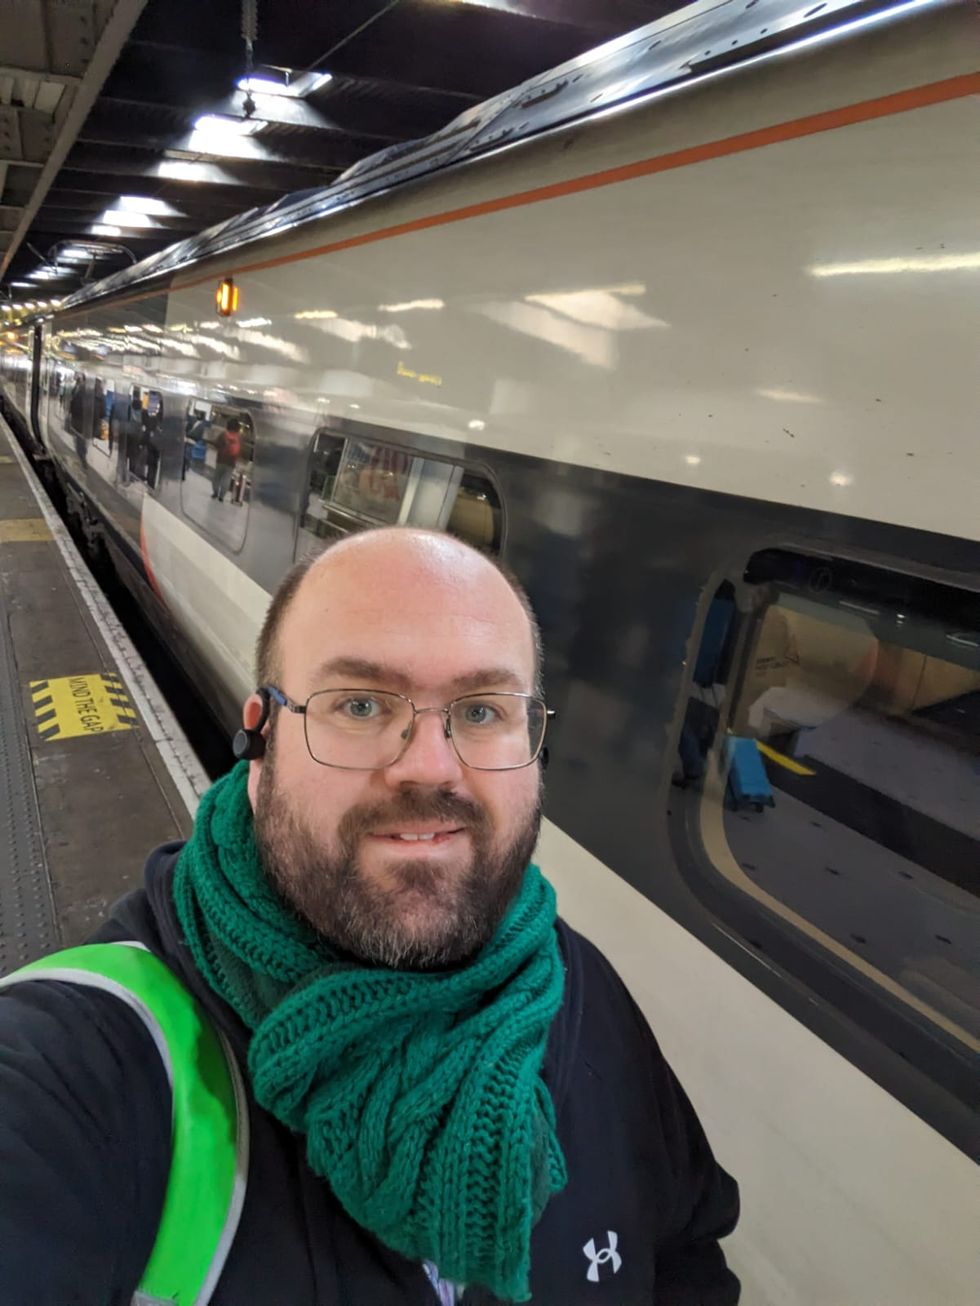 Railway worker ‘pining for own bed’ after visiting almost every station in UK